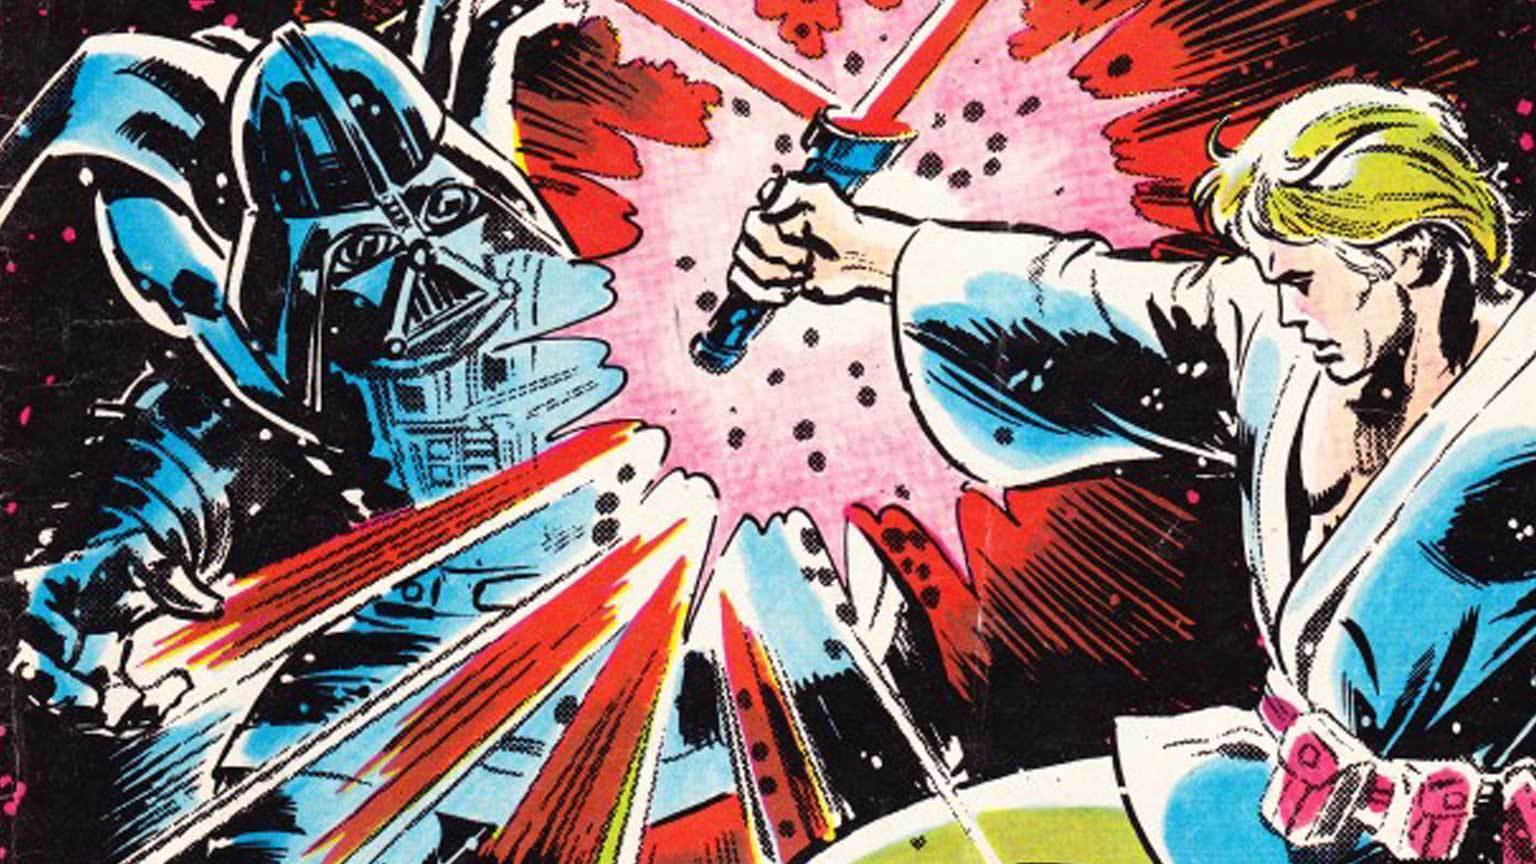 Star Wars in the UK: Flipping Through 1978's Star Wars Weekly #12!